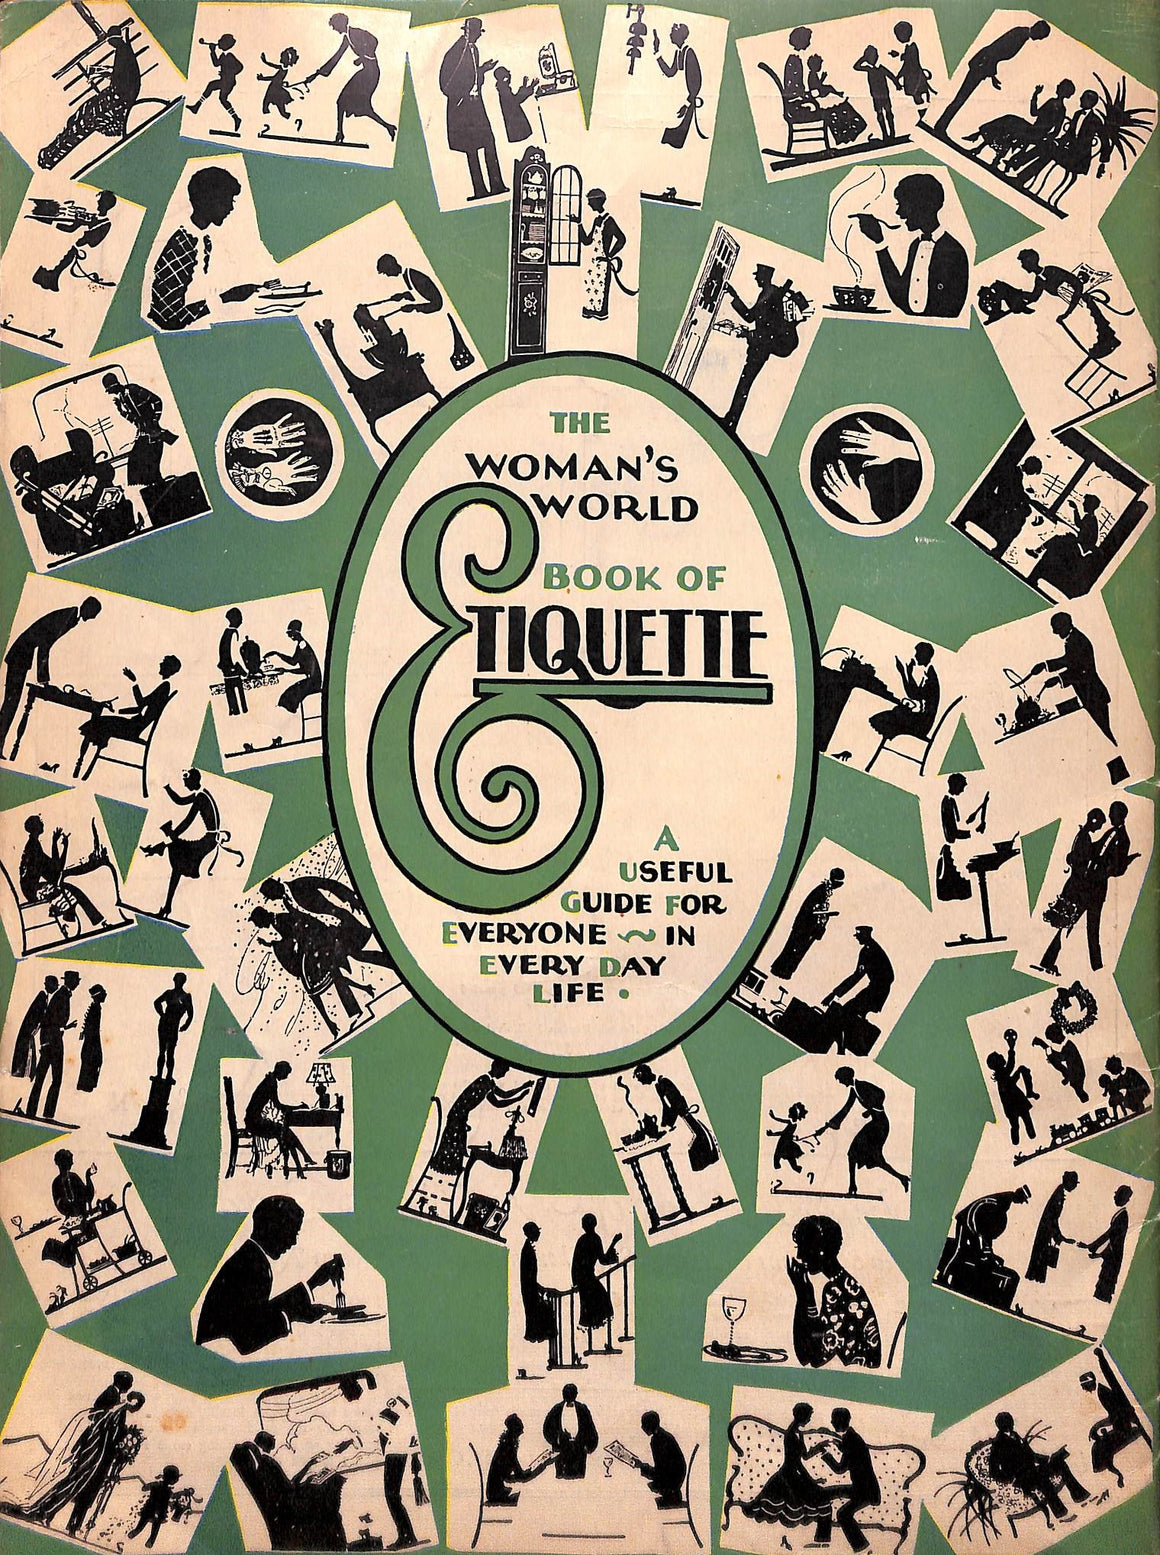 "The Woman's World Book Of Etiquette: A Useful Guide For Everyone In Every Day Life" 1928